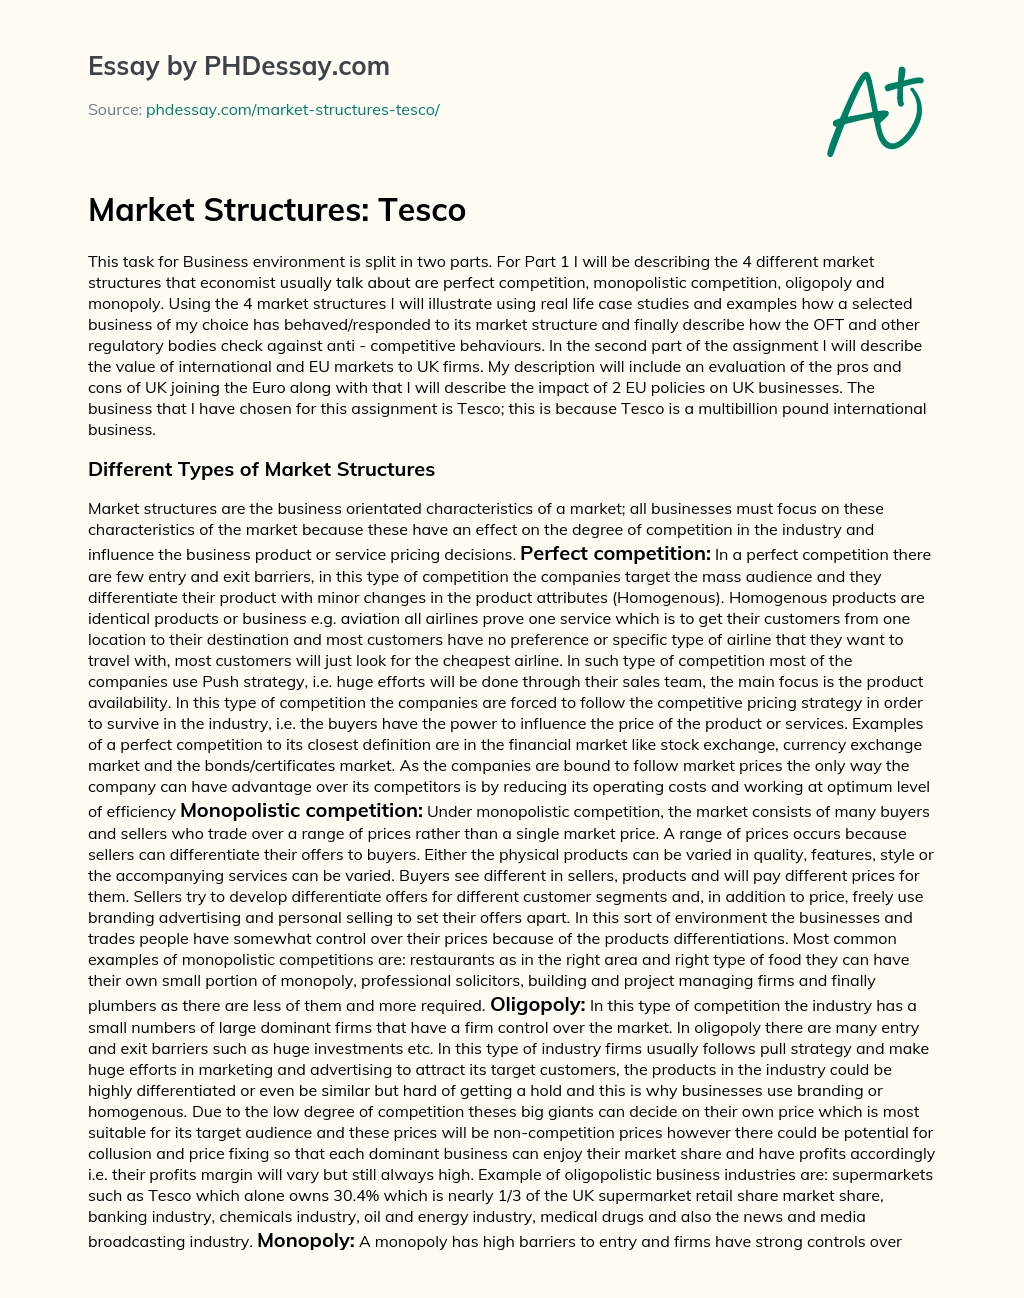 Types of Market Structures and Competition in UK essay